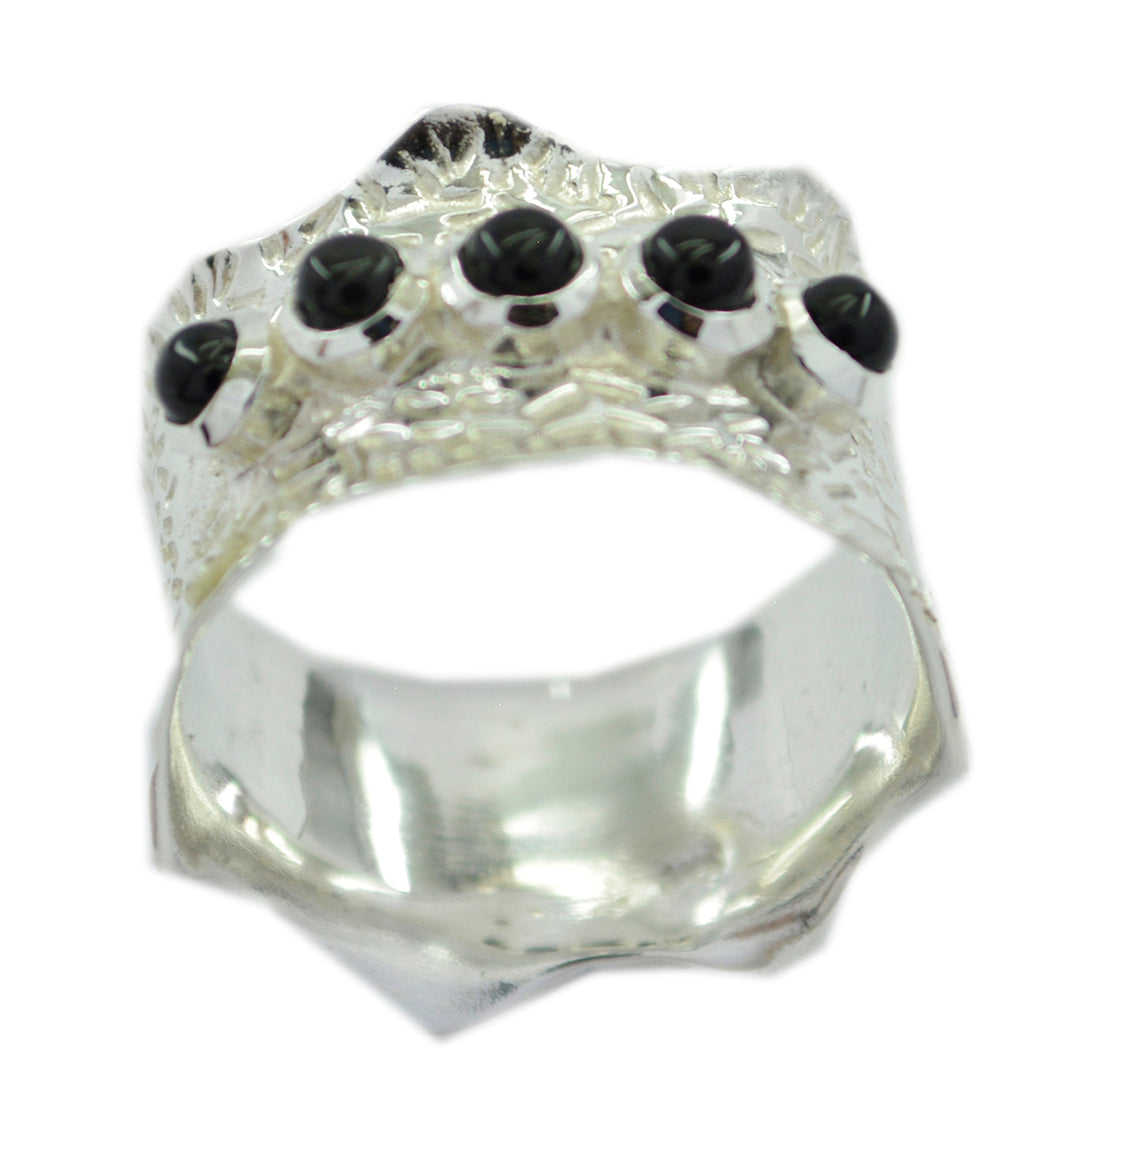 Hot Gemstone Black Onyx 925 Sterling Silver Rings Jewelry Box For Girl